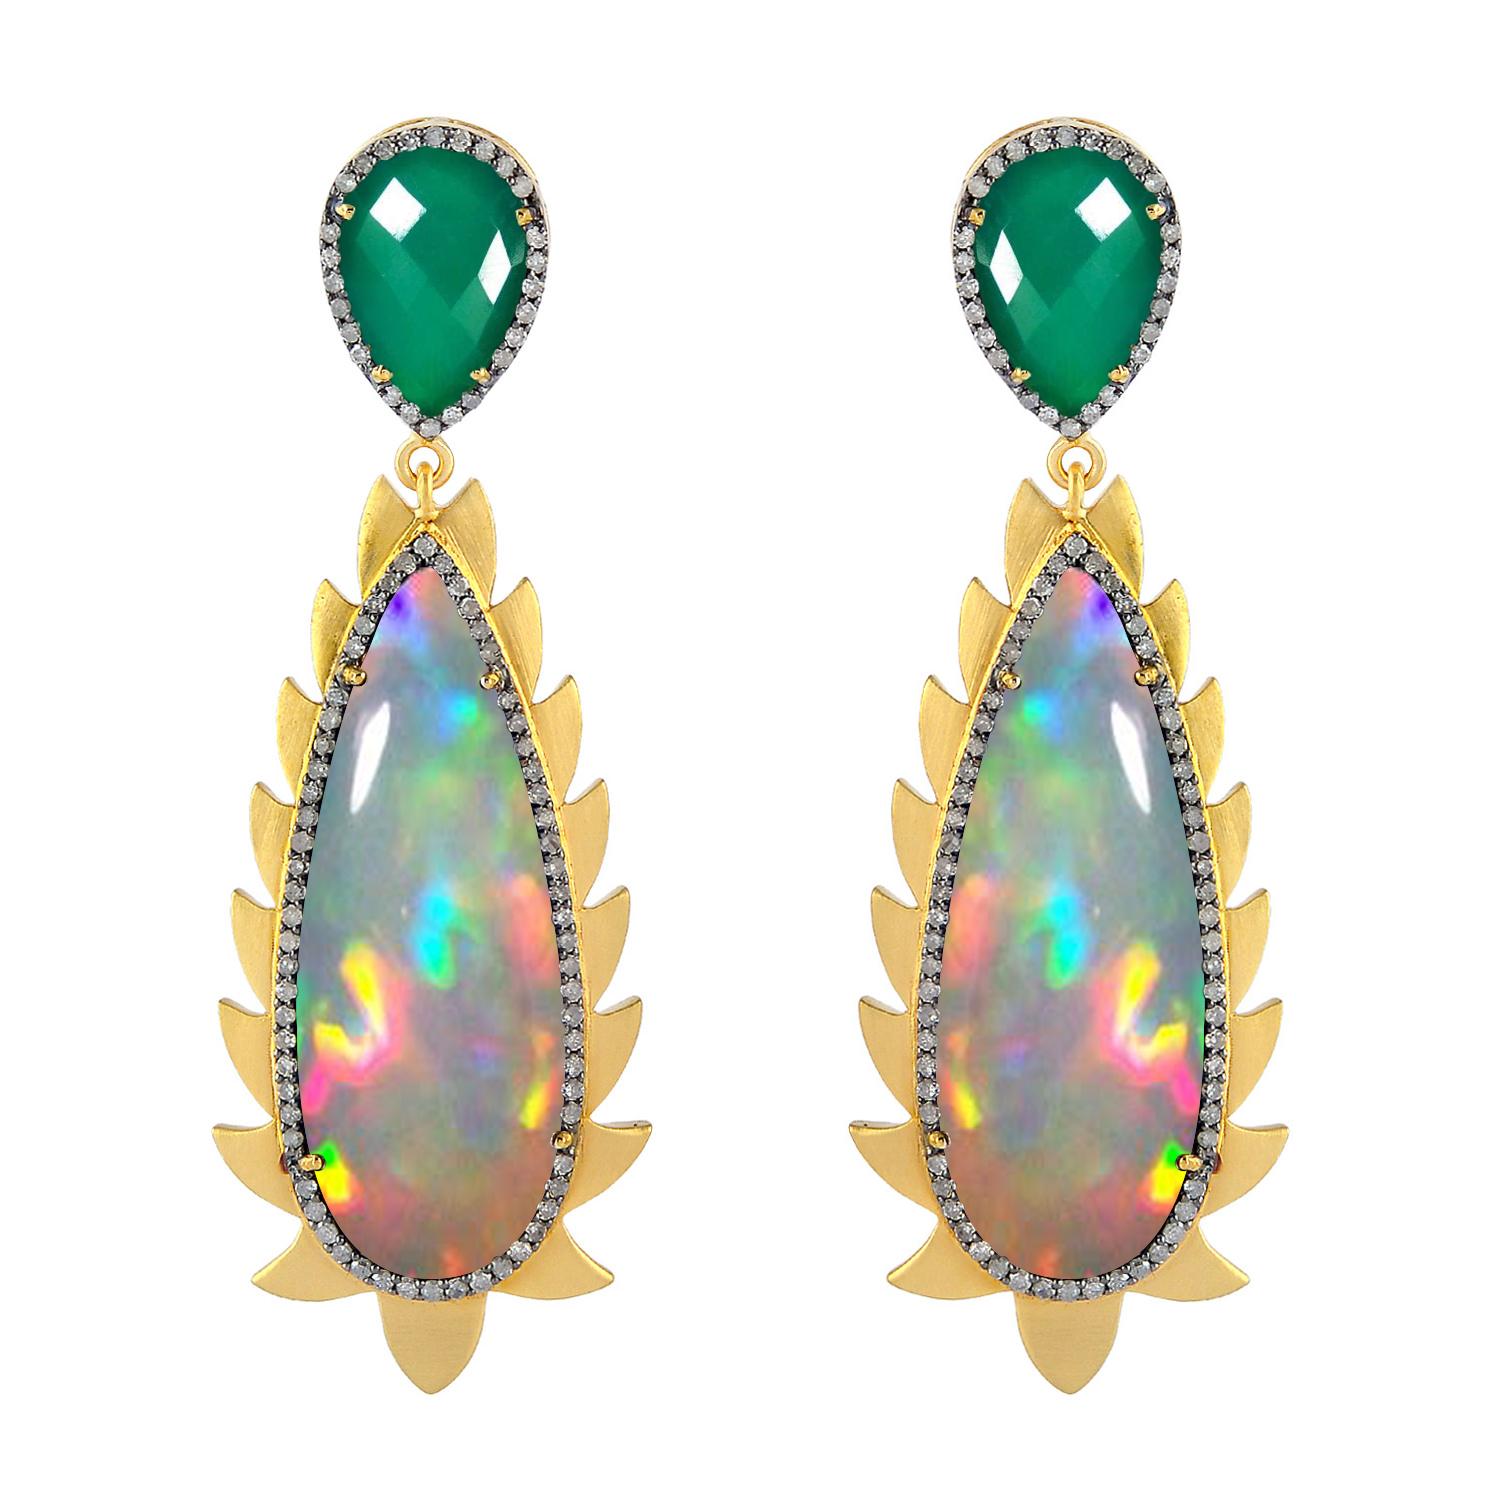 Is Opal expensive?